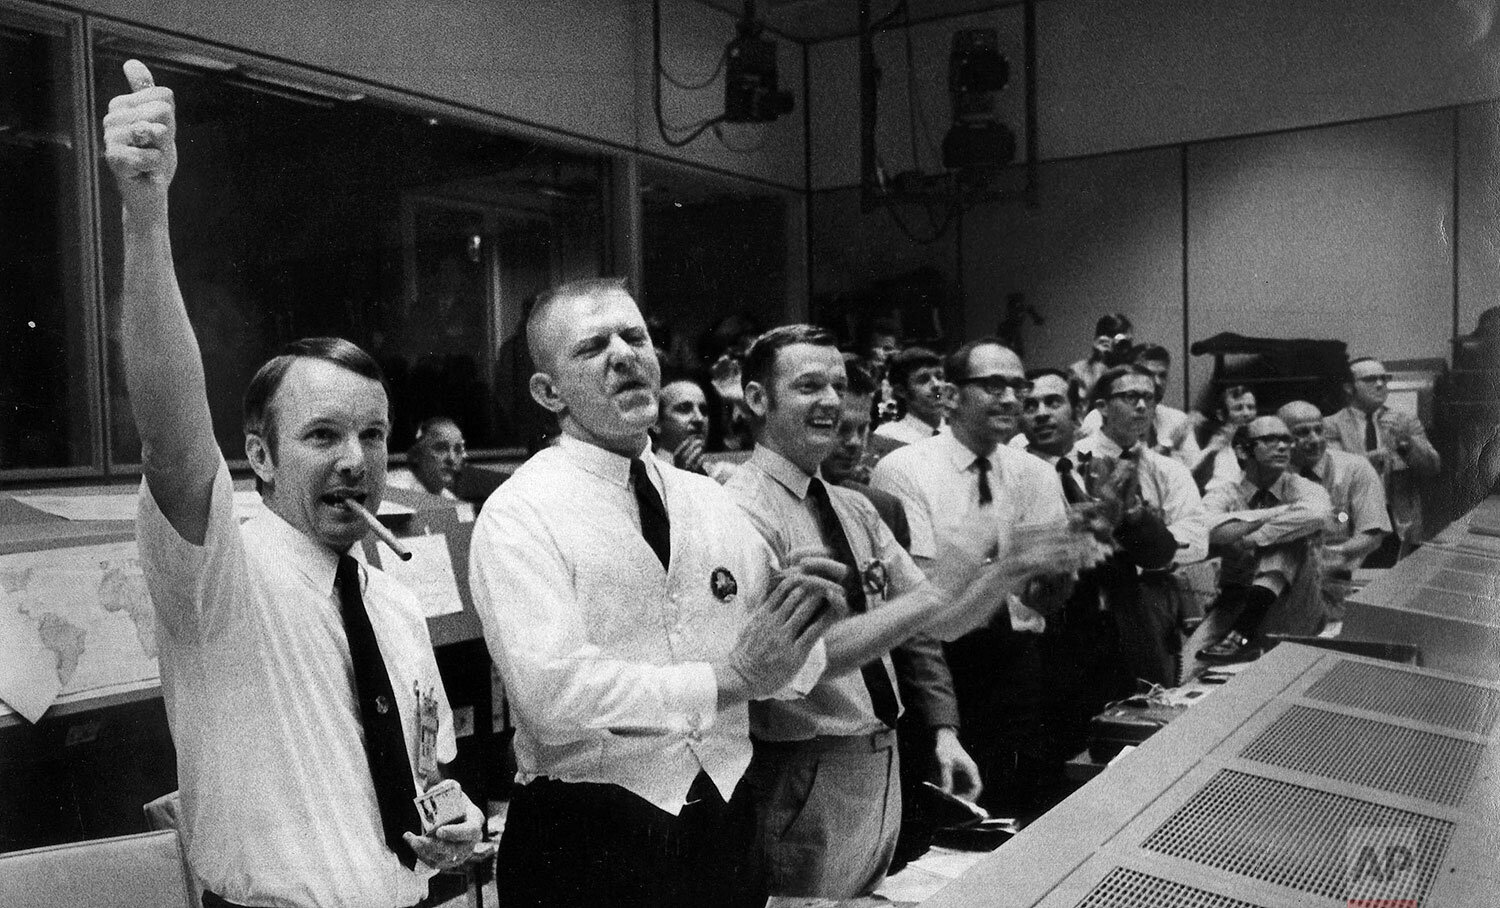  The four Apollo 13 flight crew directors who brought the crippled spacecraft back to Earth celebrate at their post in Mission Control at the Manned Spacecraft Center, Houston as they learn of the command module's successful splashdown April 17, 1970